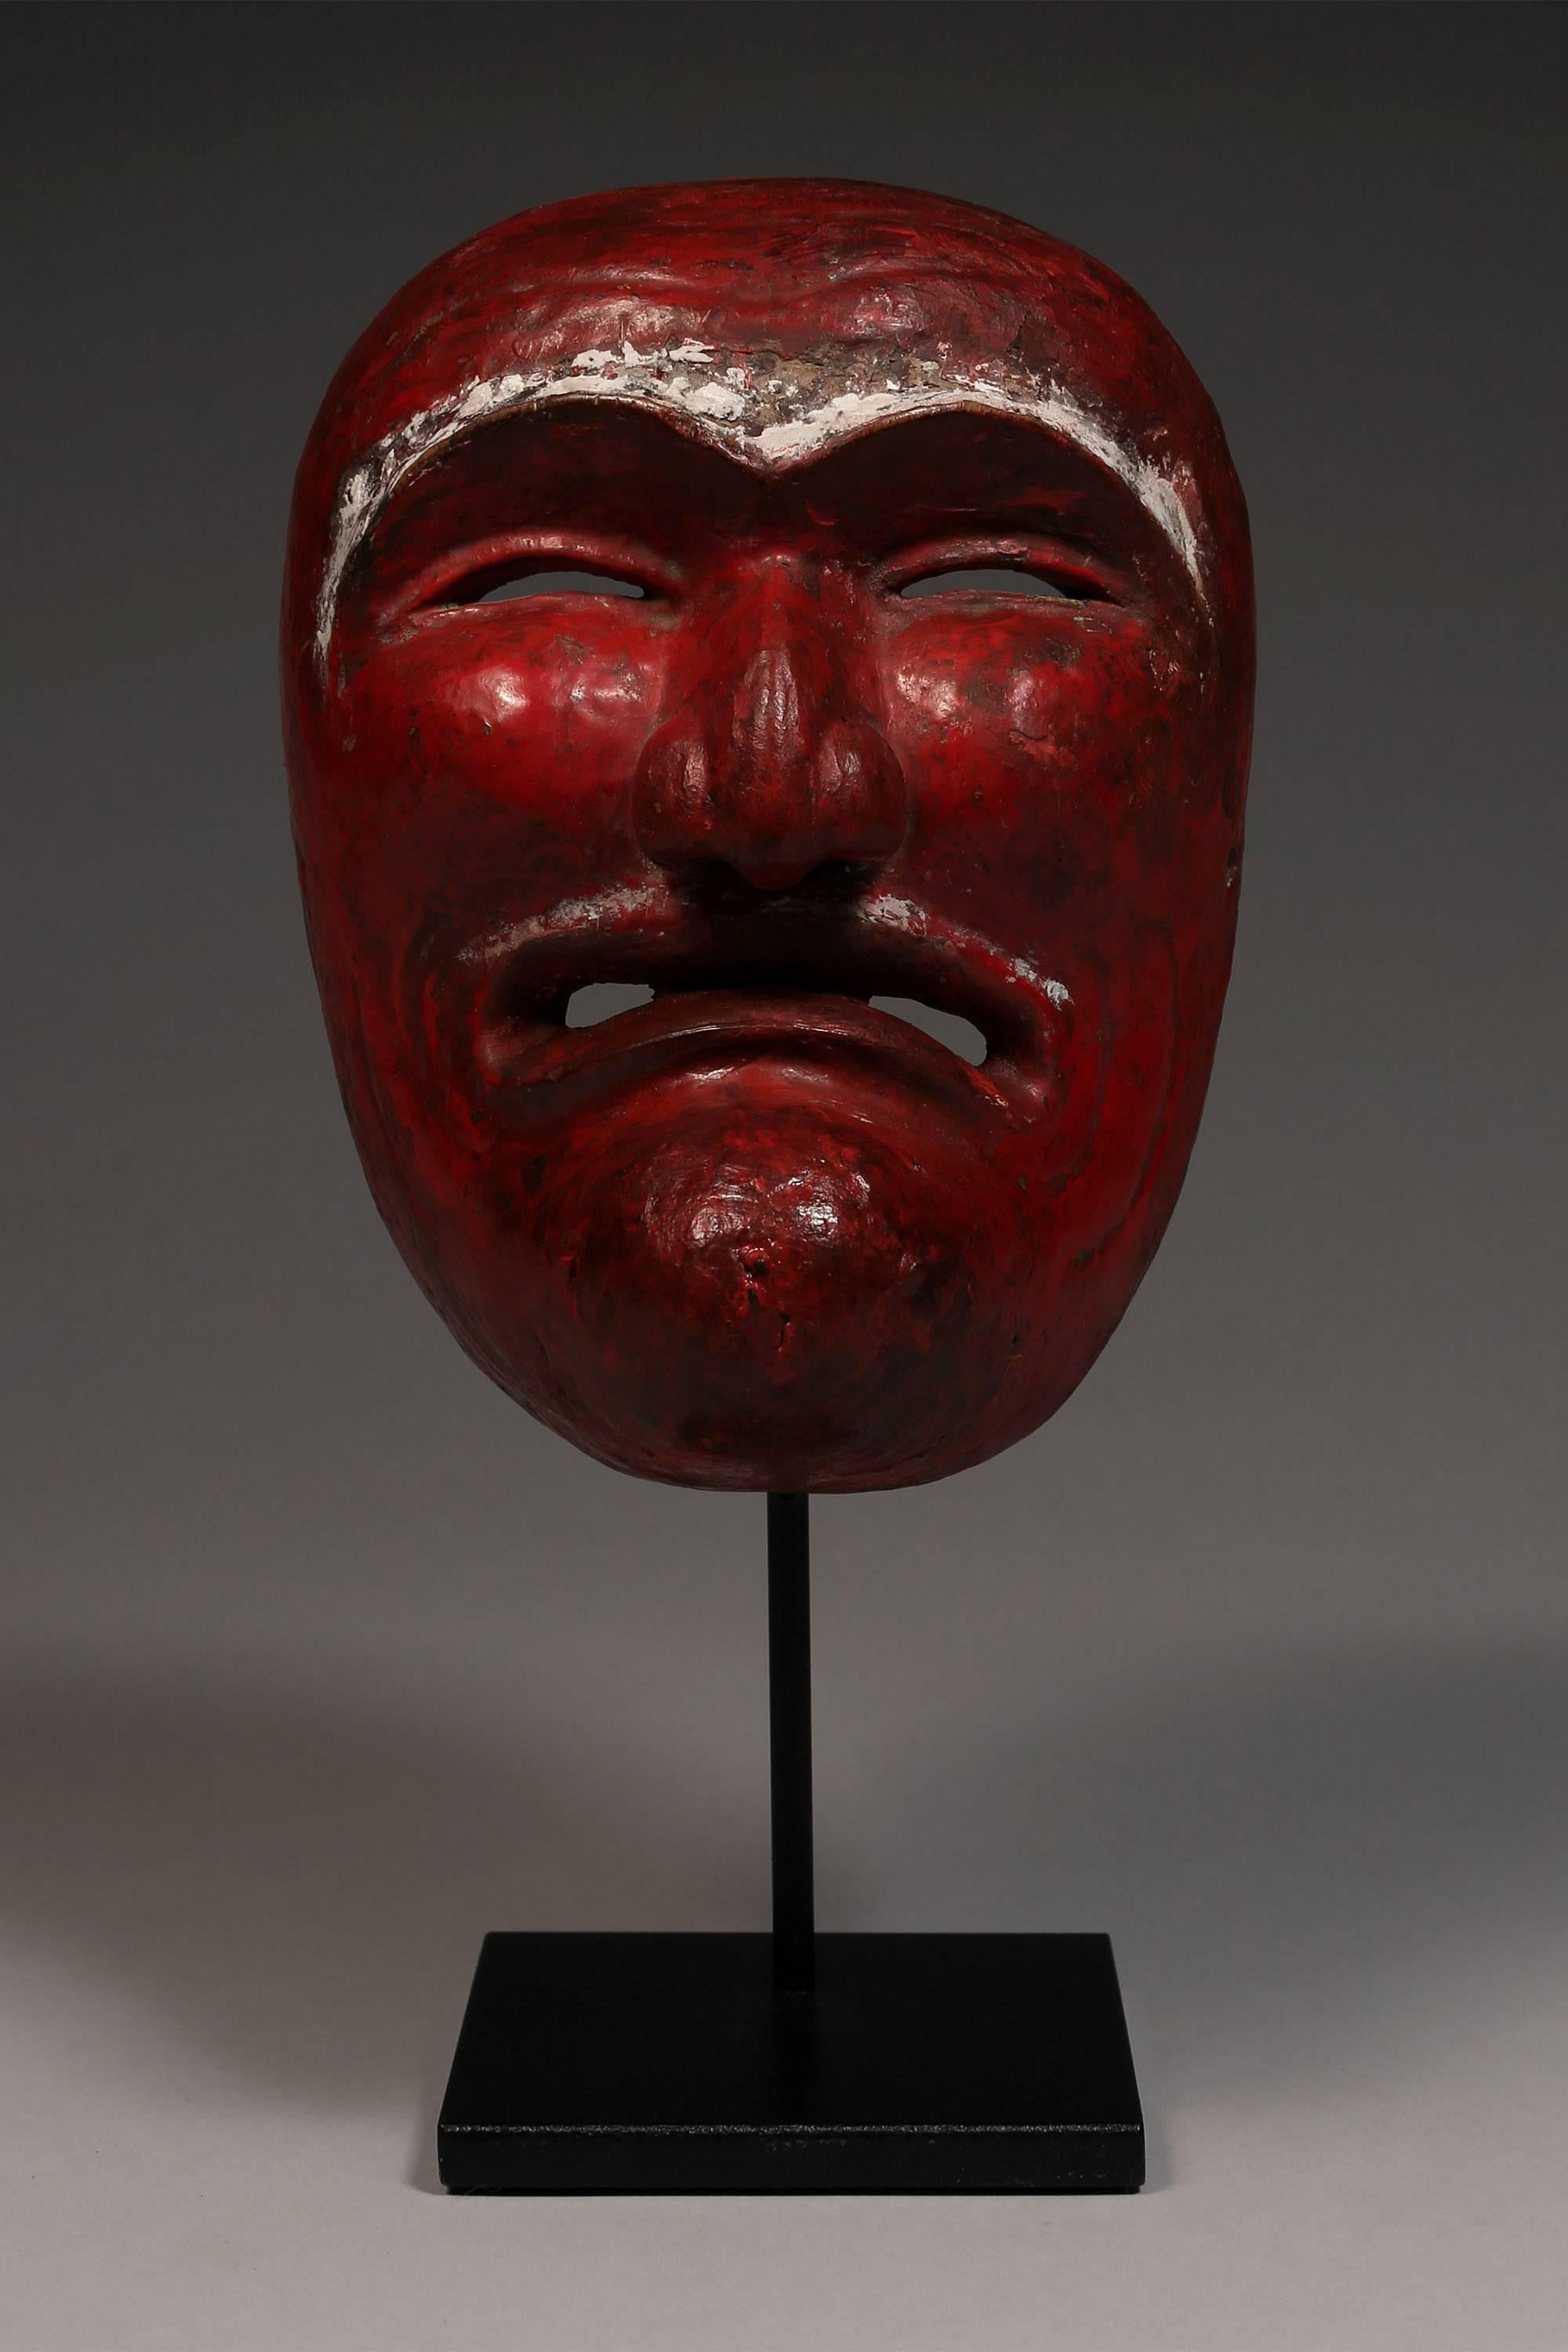 Early 20th century Noh mask Japan/Indonesia old man character

This striking mask is an excellent example of a Noh Theatre mask for the 